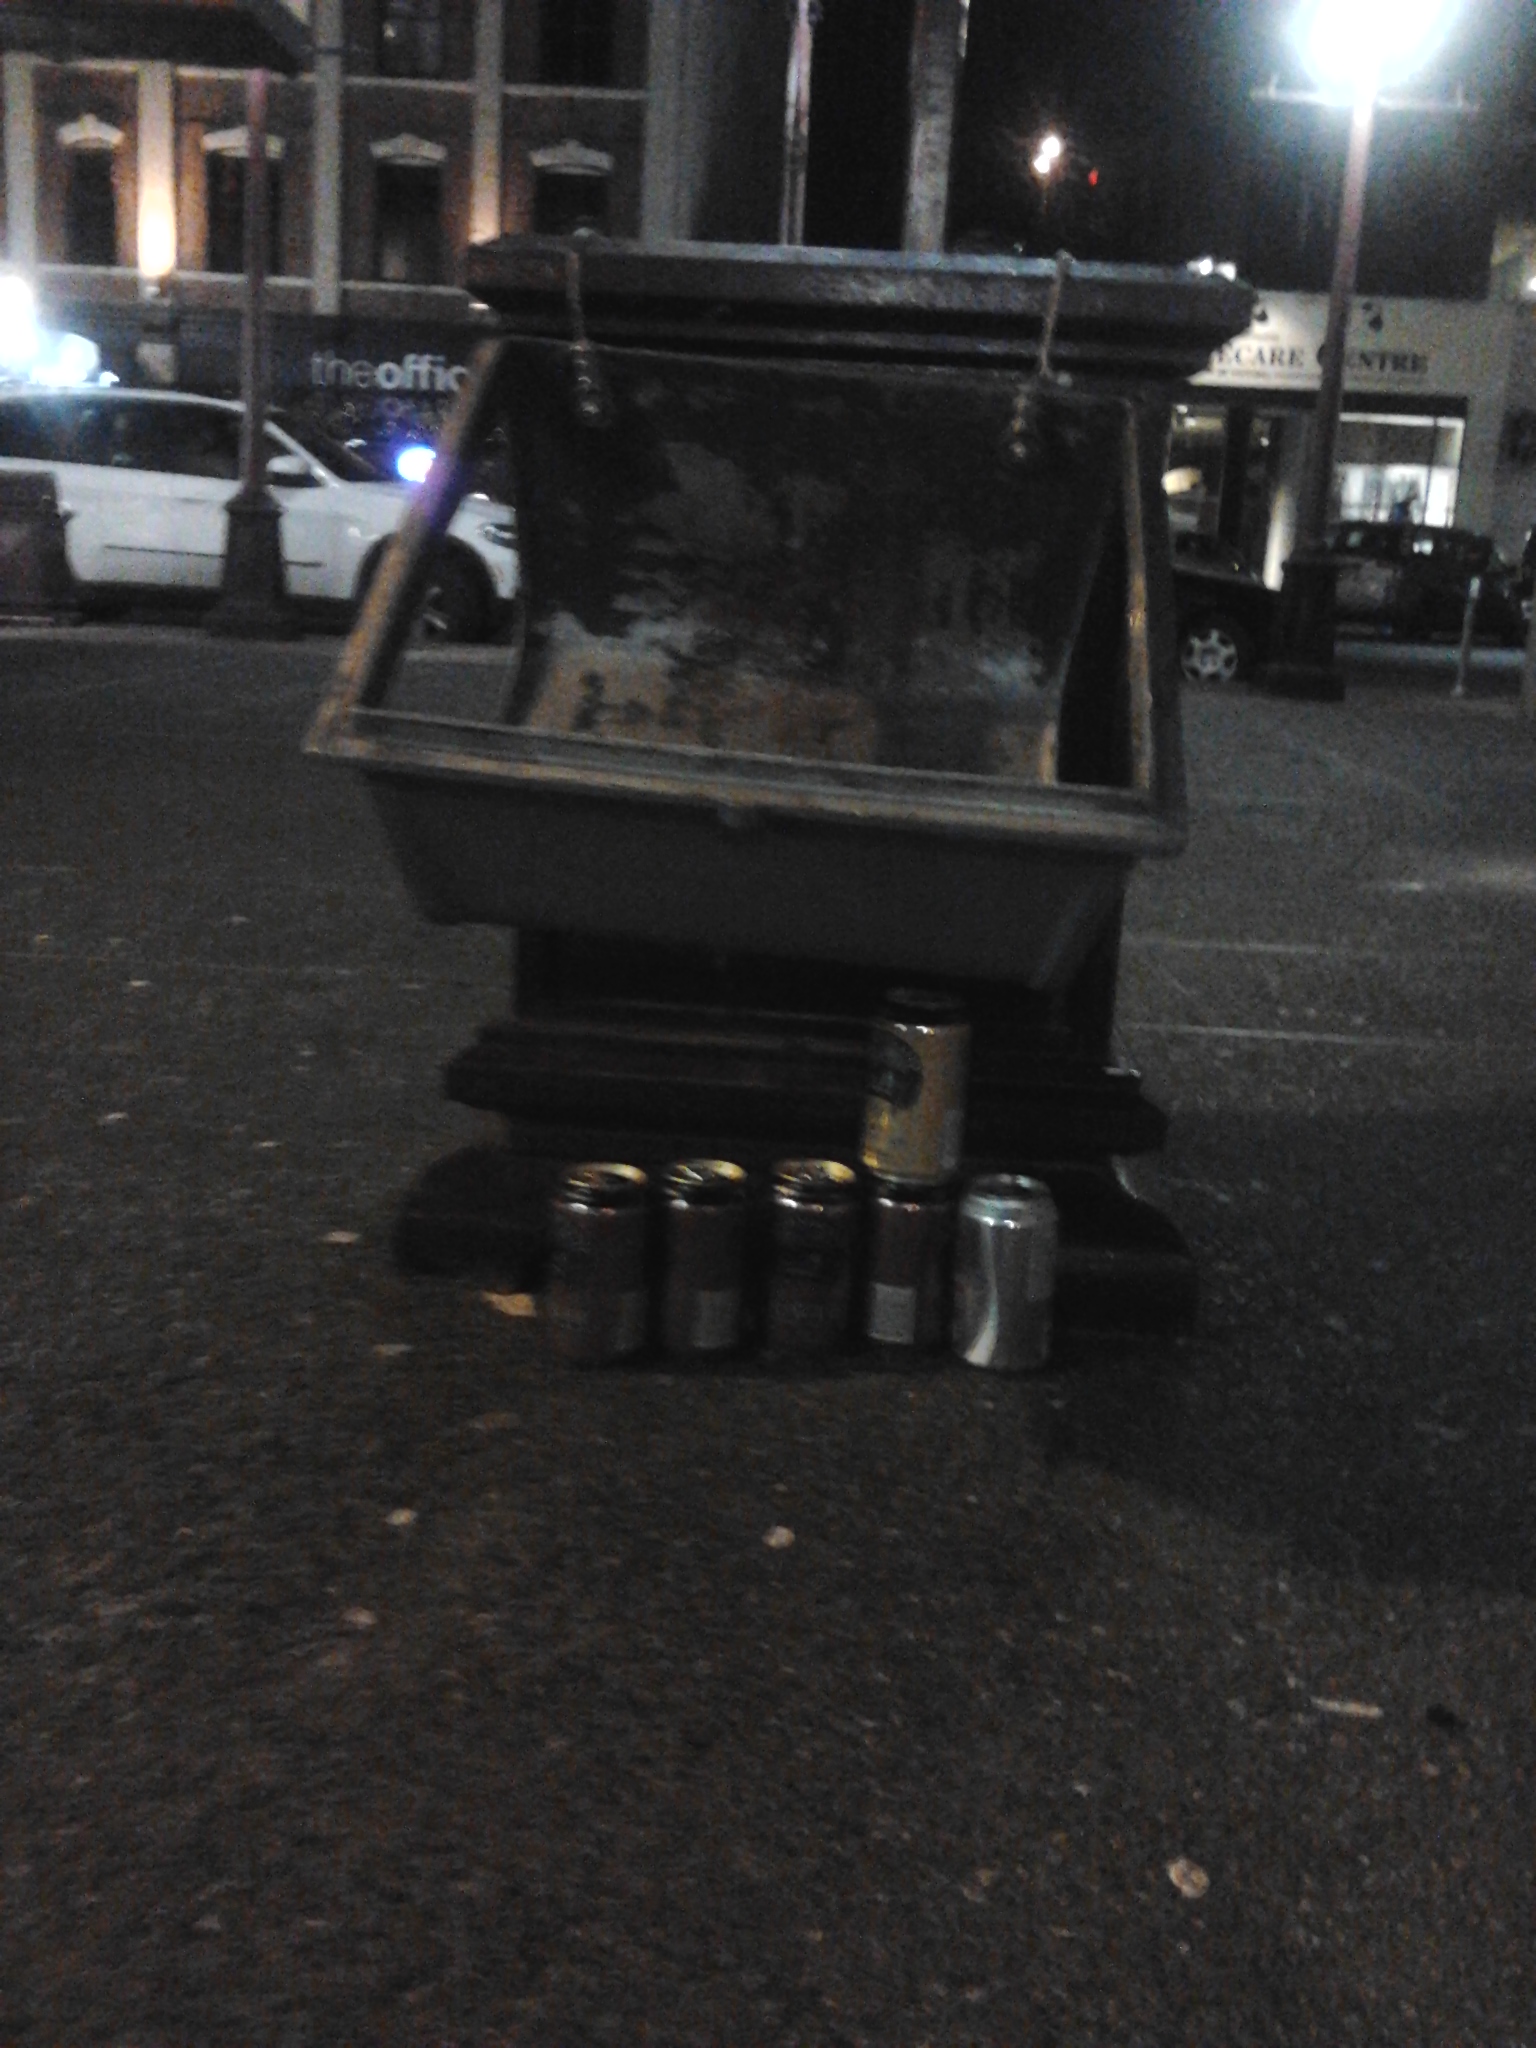 So I go though the trouble of neatly stacking some cans next to a garbage can by my place for the homeless people that collect them. I come out ten minutes later some homeless guy had flipped open the can left it open and completely missed the neatly stacked cans. Fucking stupid homeless!